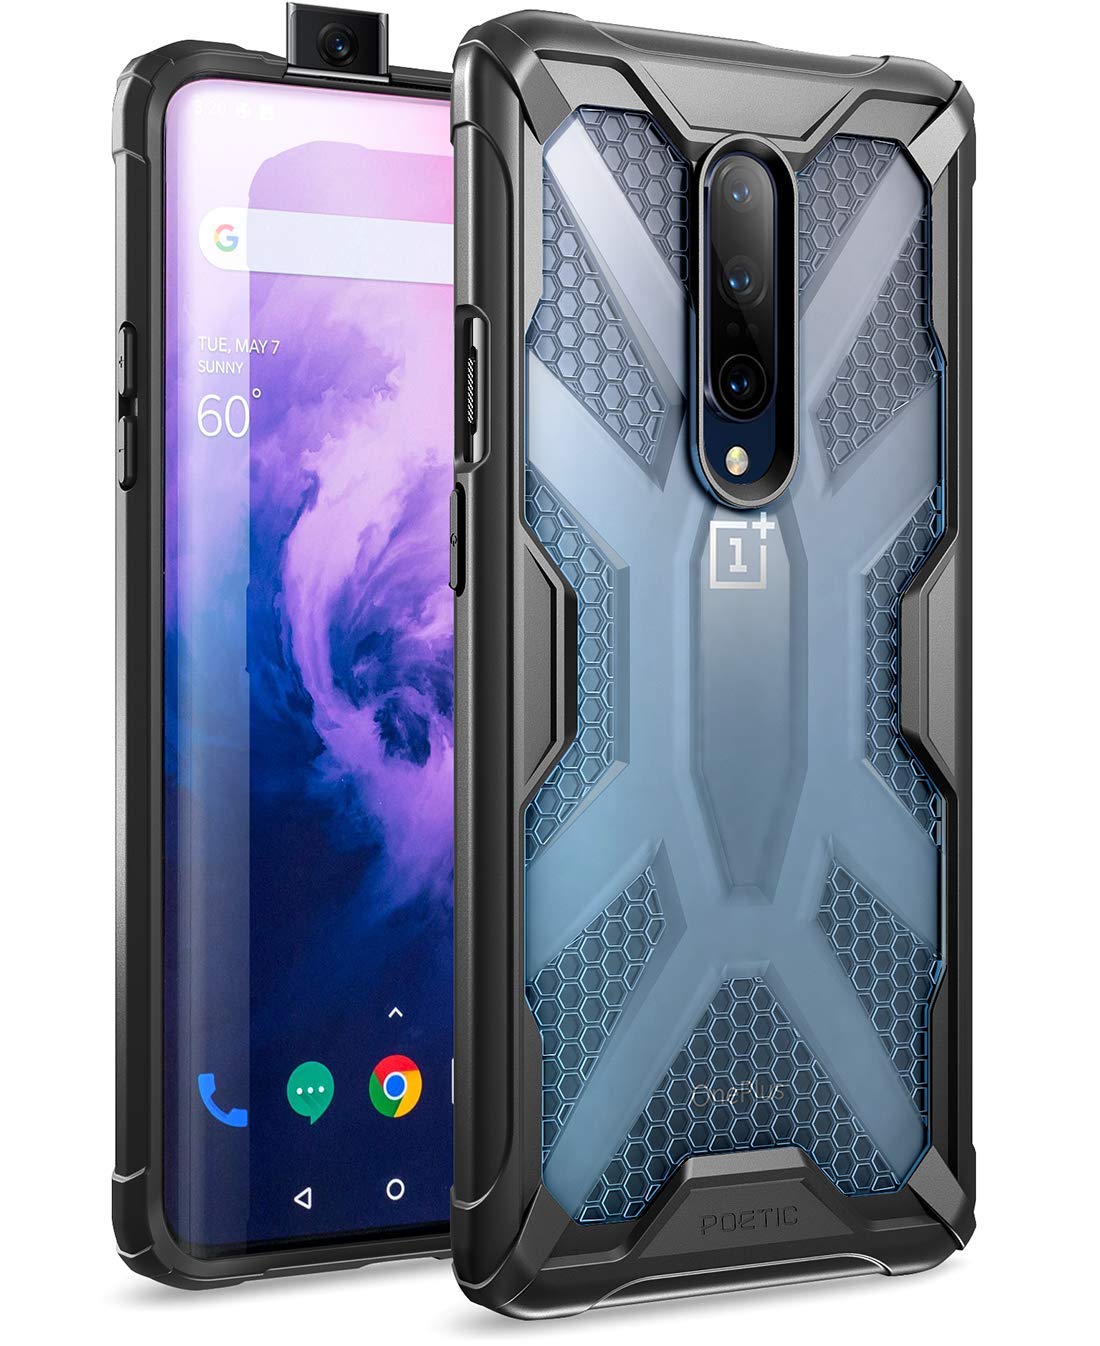 Protective Clear Bumper OnePlus 7 Pro Case